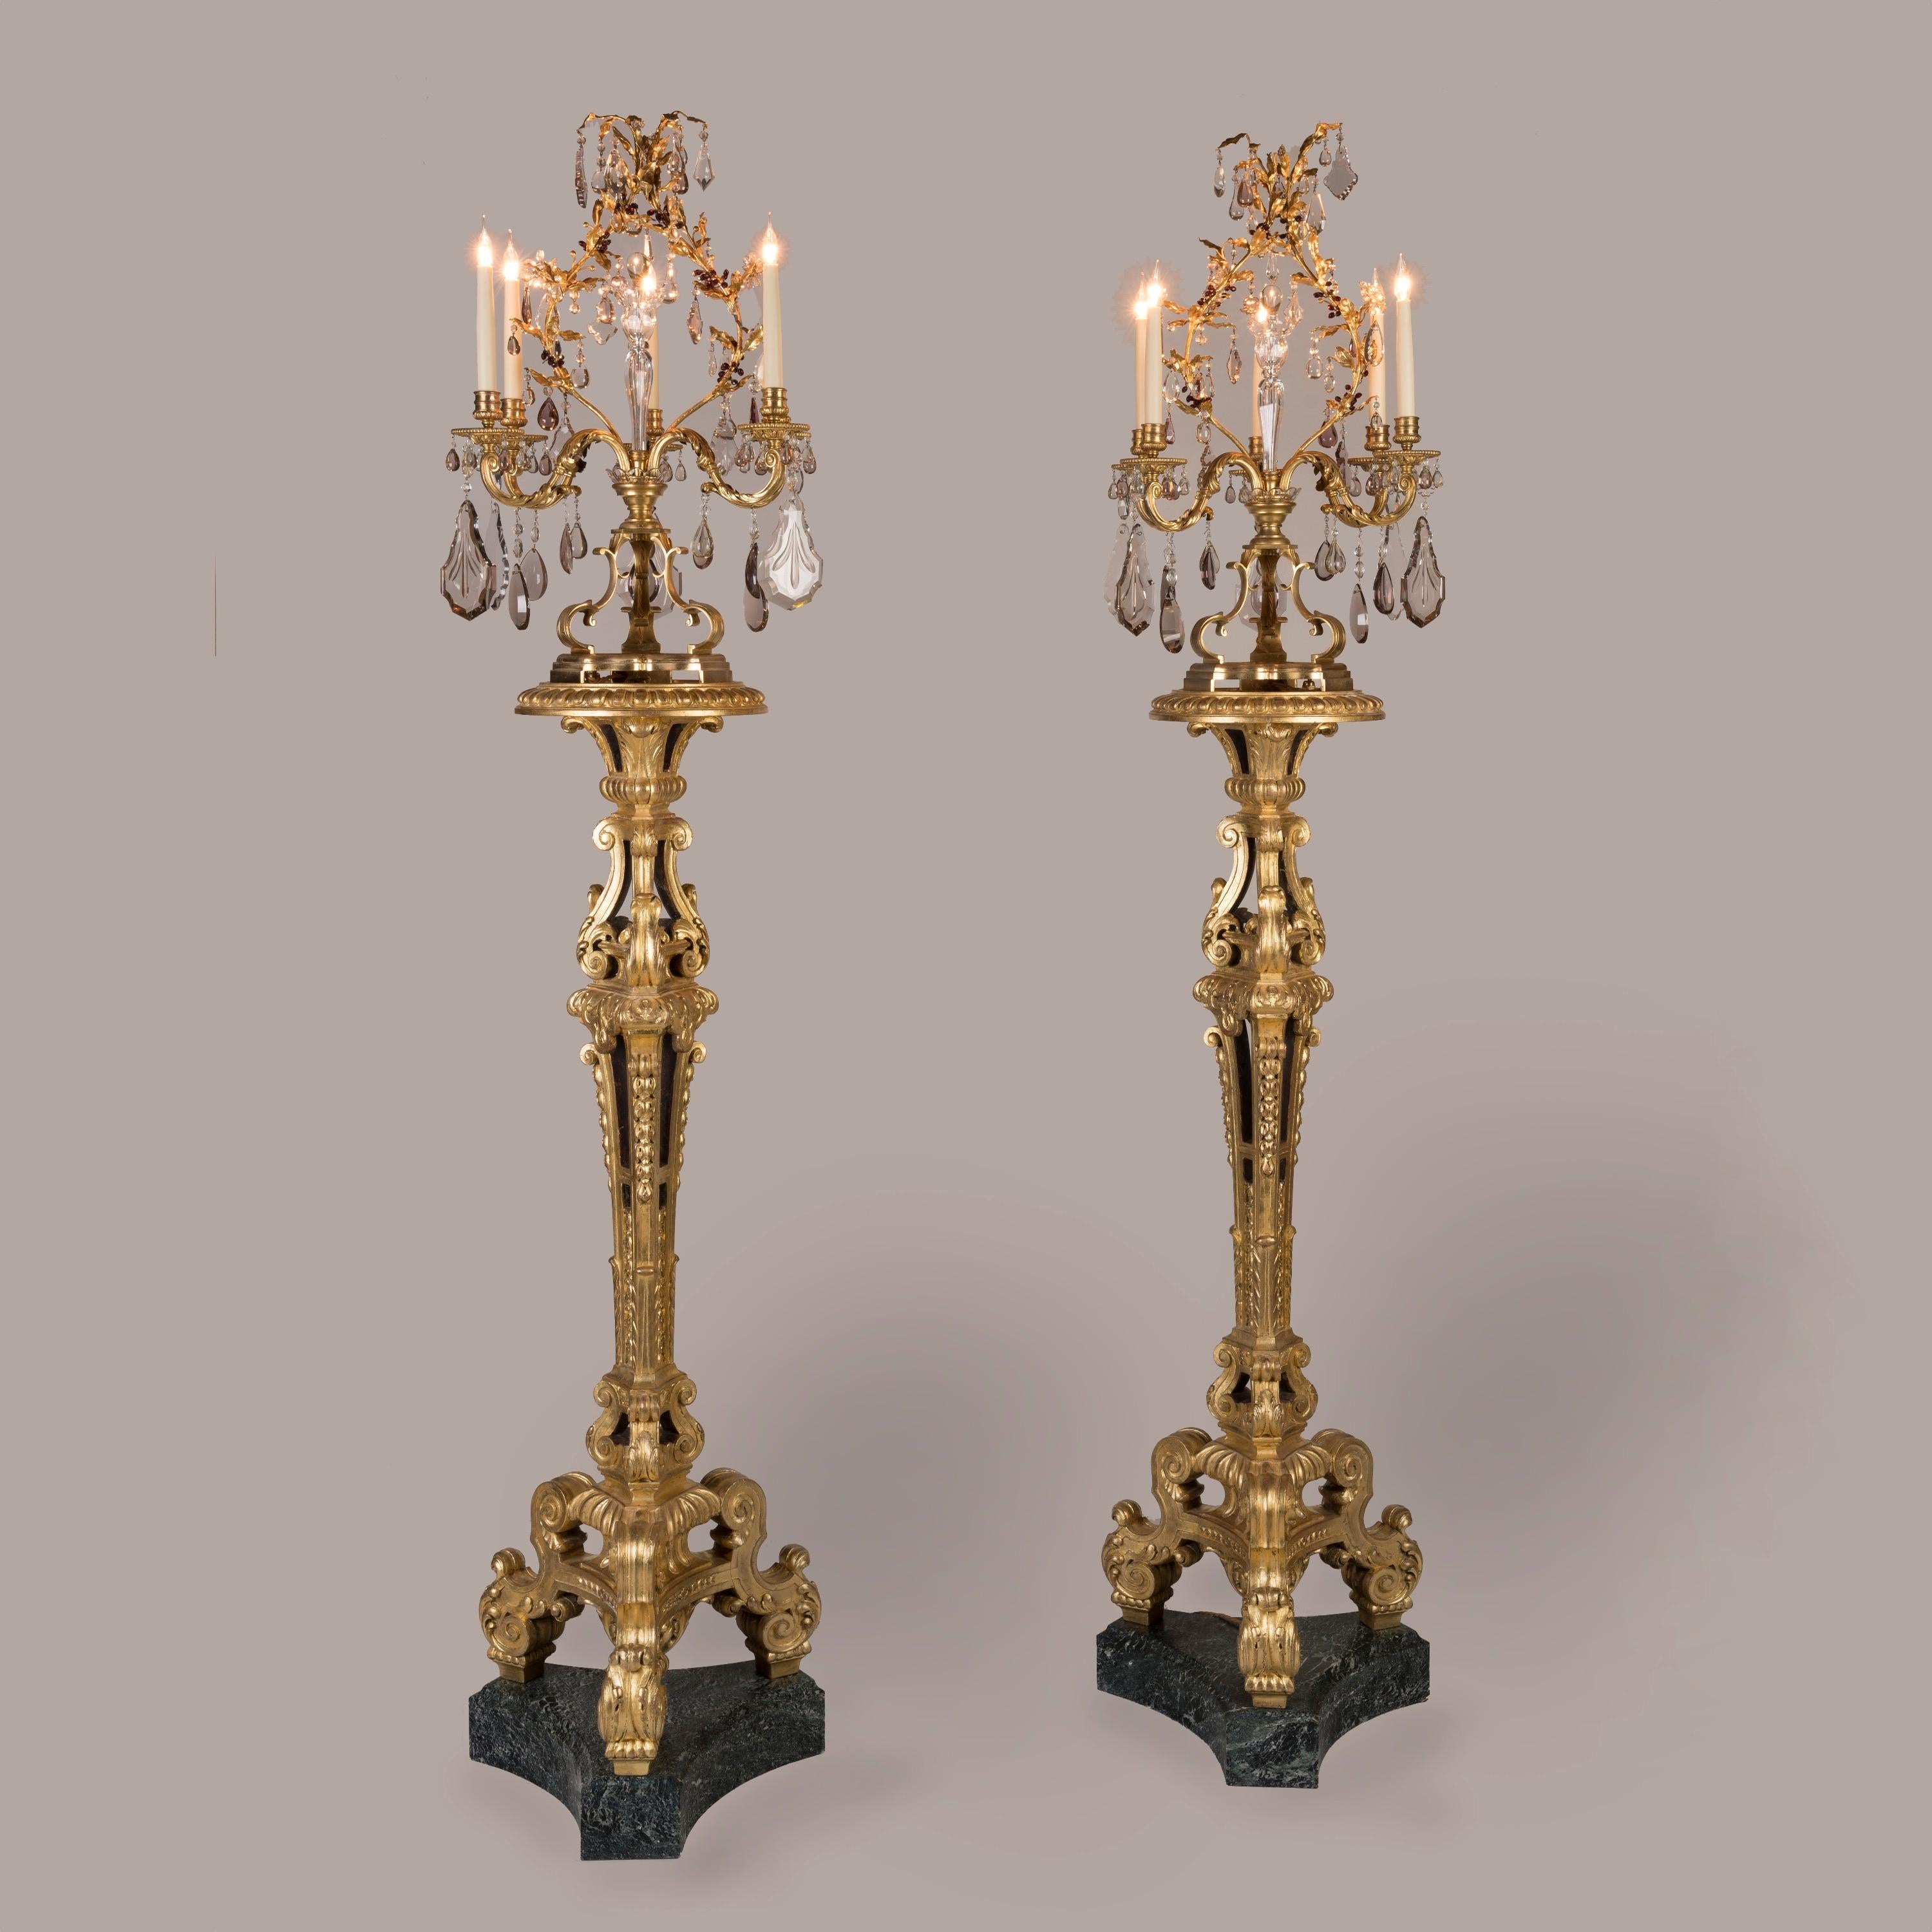 A Pair of Giltwood Carved Torchères

After the Design by Jean Pelletier
for the King's State Apartments

Supported on incurved tripartite plinths, the pair of torchères hand-carved in the French style, with three scrolled legs and a triangular